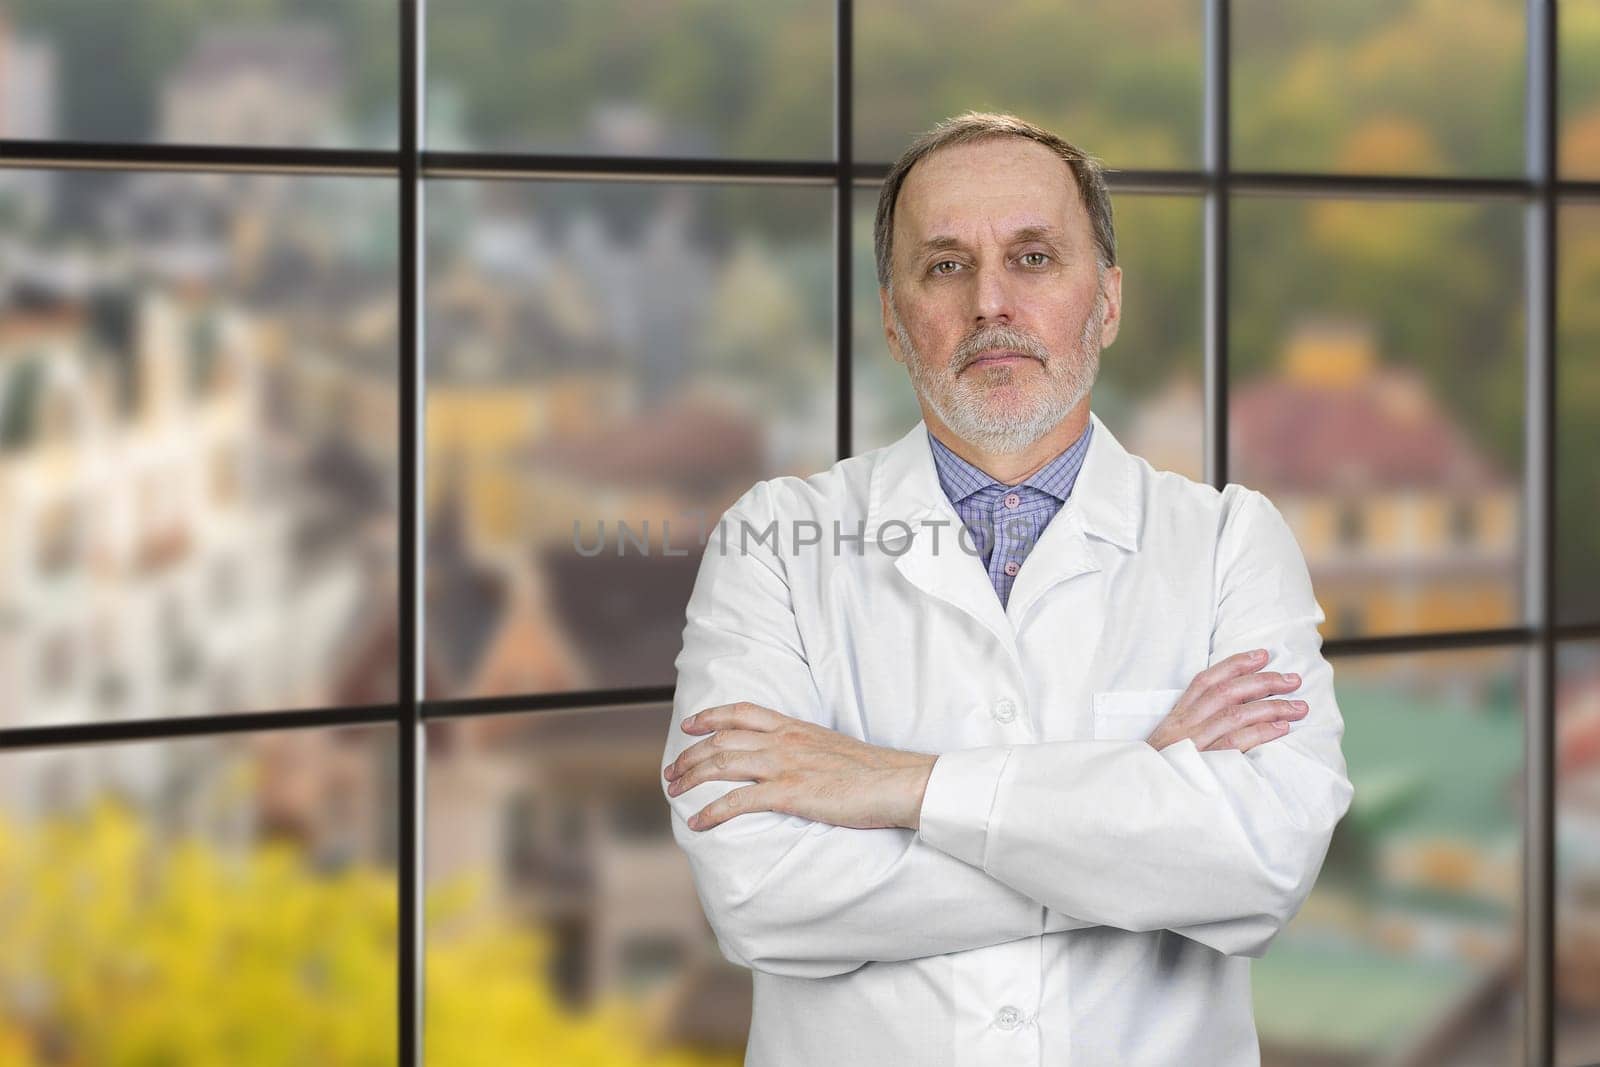 Portrait Of Happy Mature Male Doctor With Folded Arms. Checkered windows backgorund with cityscape view.